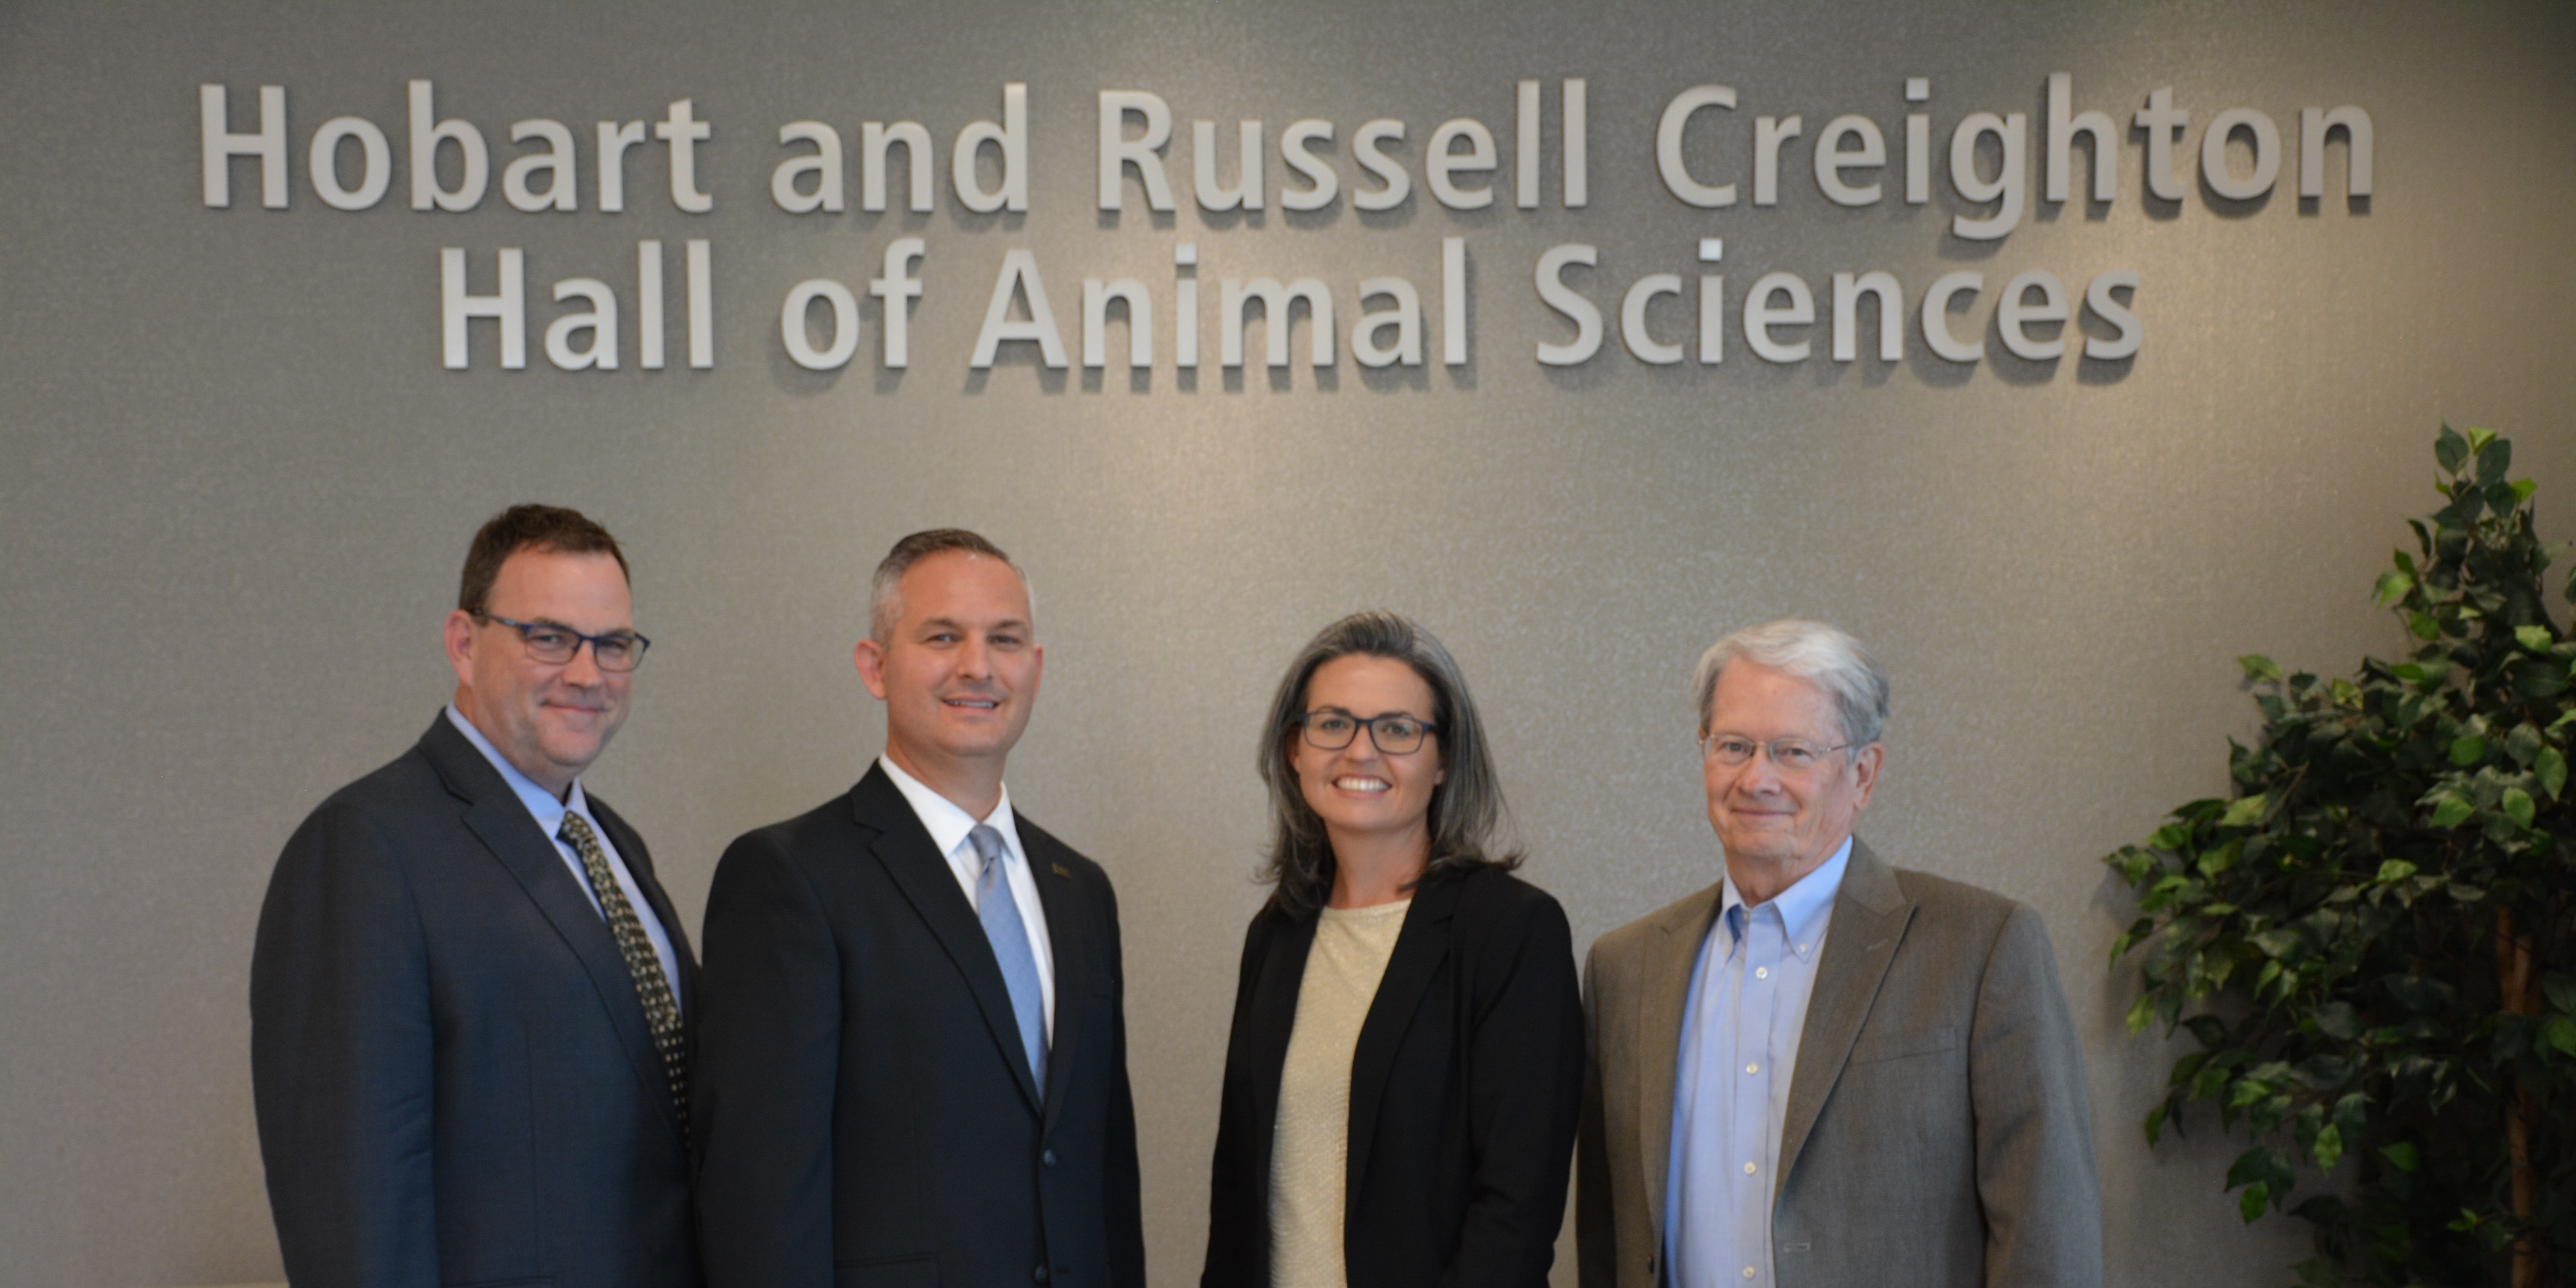 From left to right: Dr. John Blanton, Dept. Head; Dr. Brian Bowker, Mid-Career; Dr. Jolena Waddell, Early Career; and Mr. Gerald “Jerry” Nickel, Lifetime